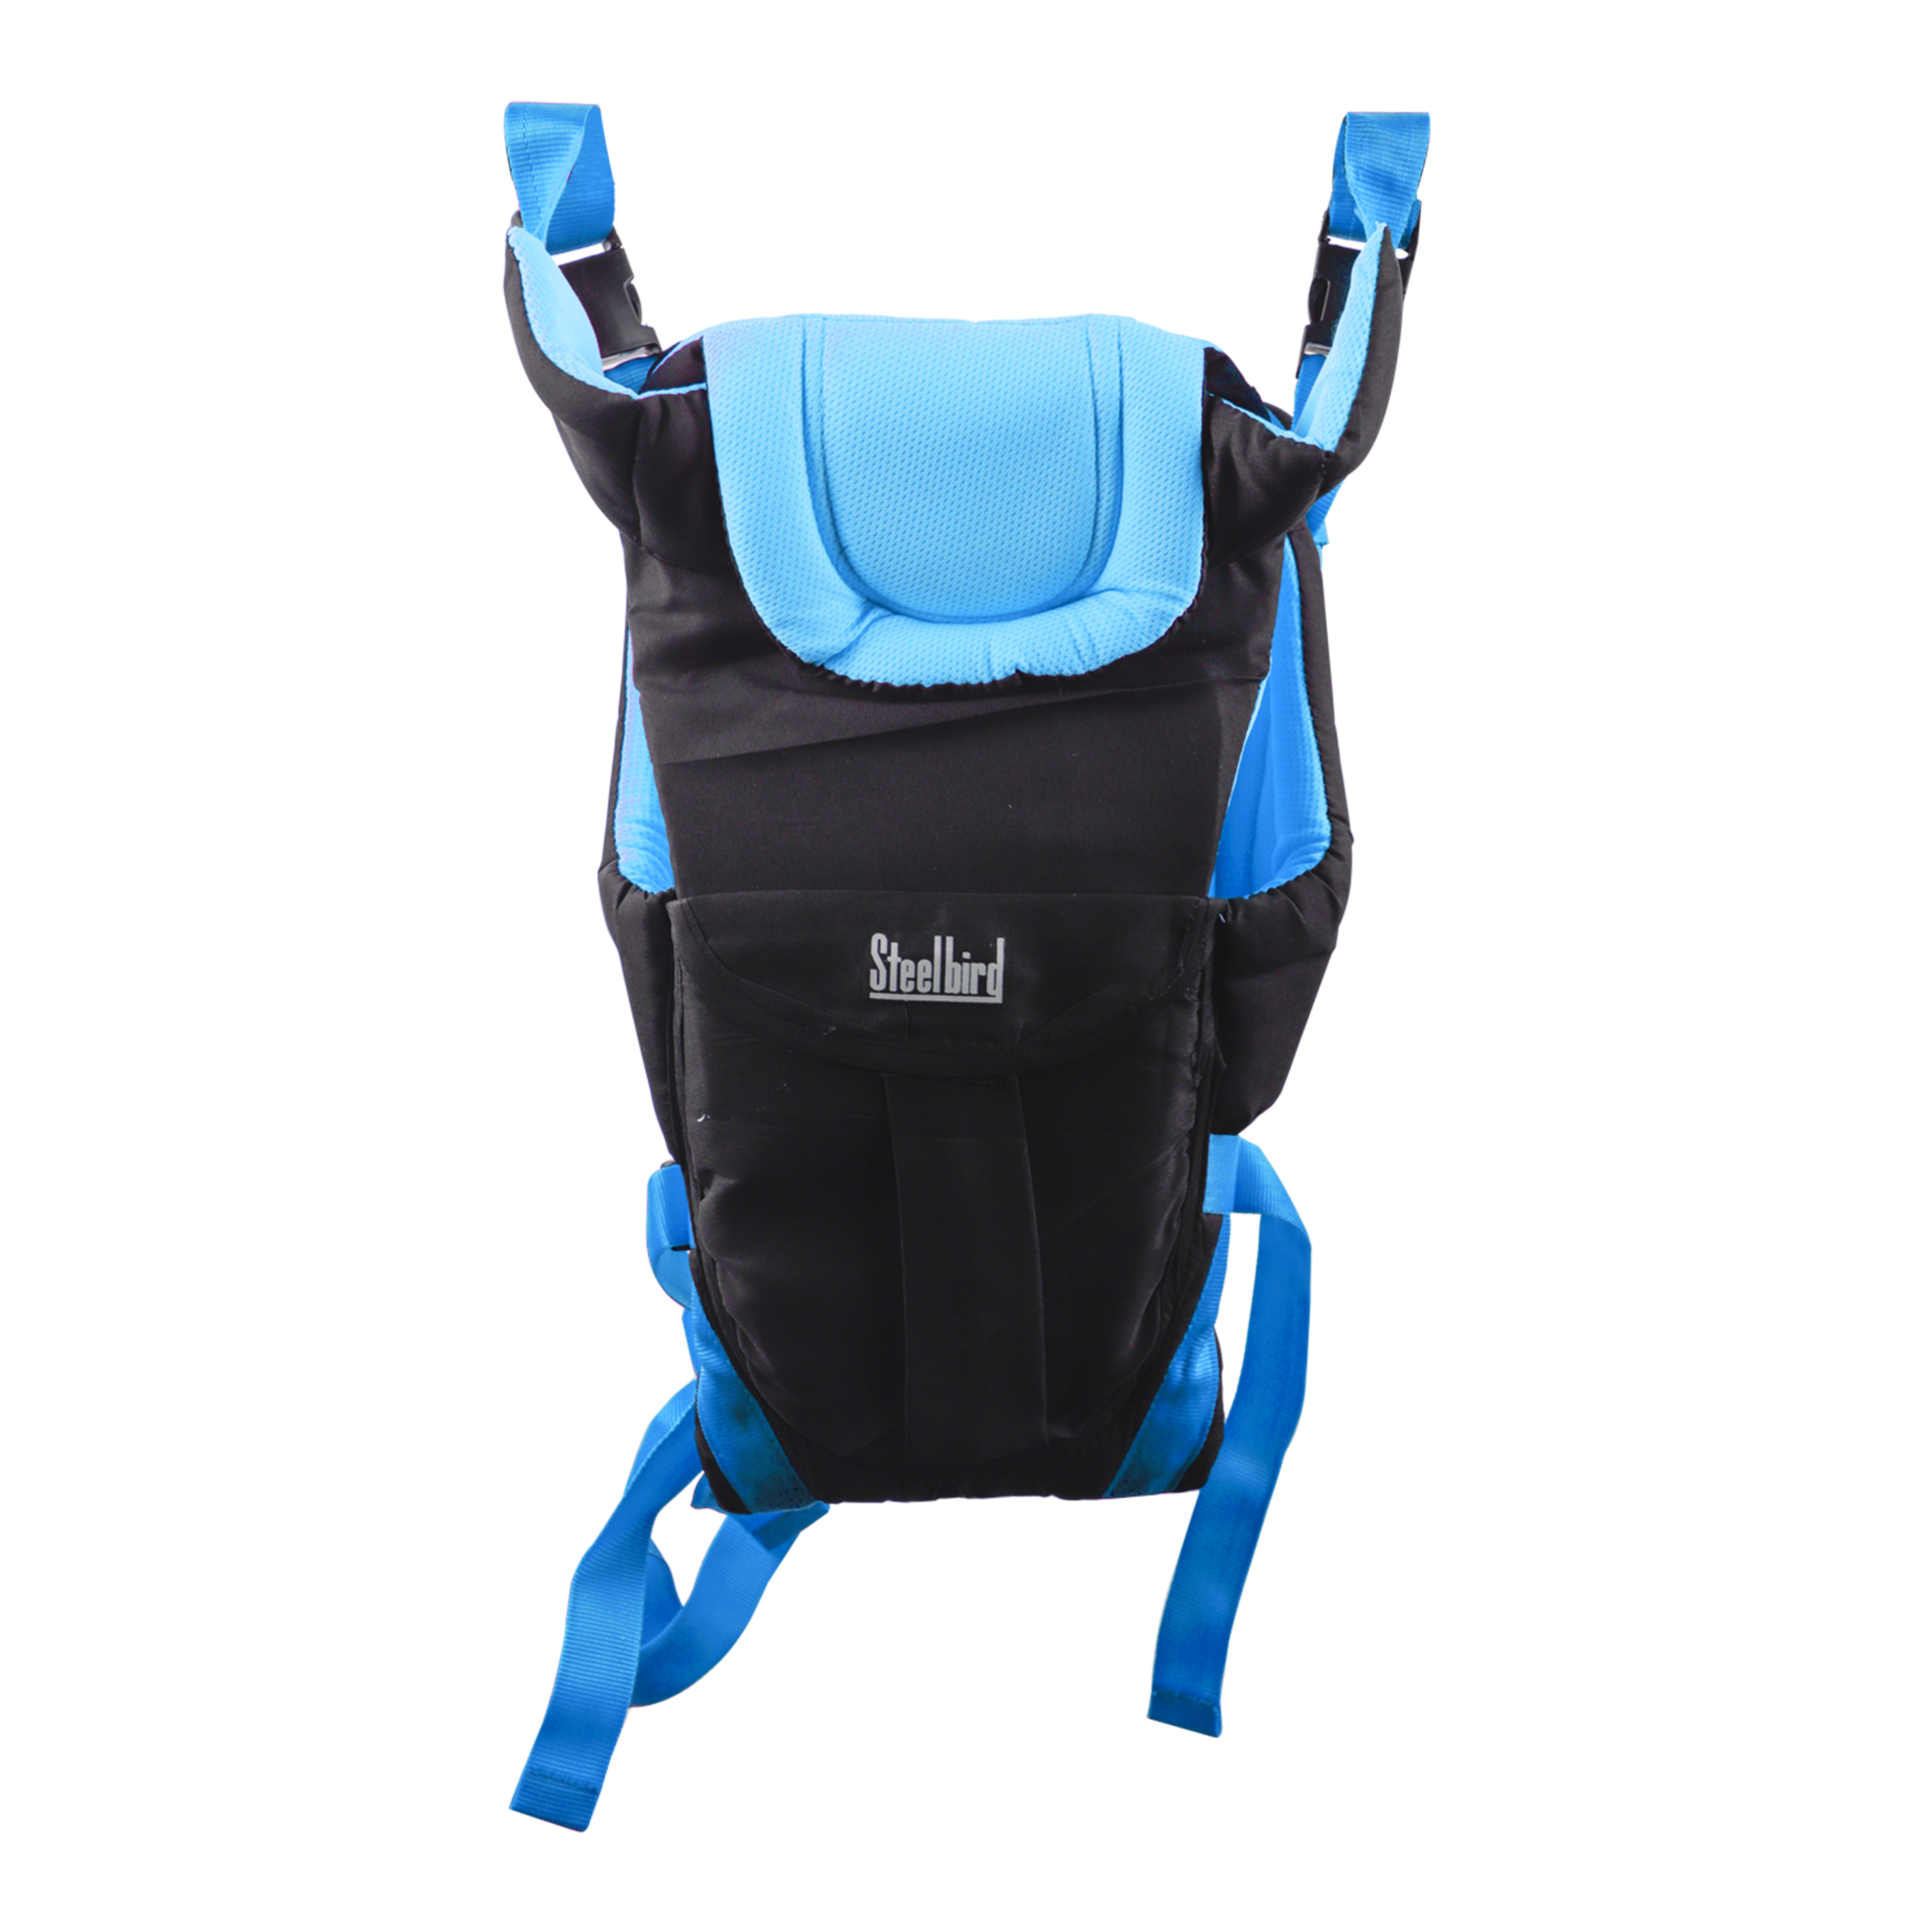 Steelbird Super Four Kids 4-in-1 Adjustable Baby Carrier Cum Kangaroo Bag-Lightweight And Breathable-Back-Front Carrier For Baby With Safety Belt-Max Weight Up To 12 Kg (Blue Black)